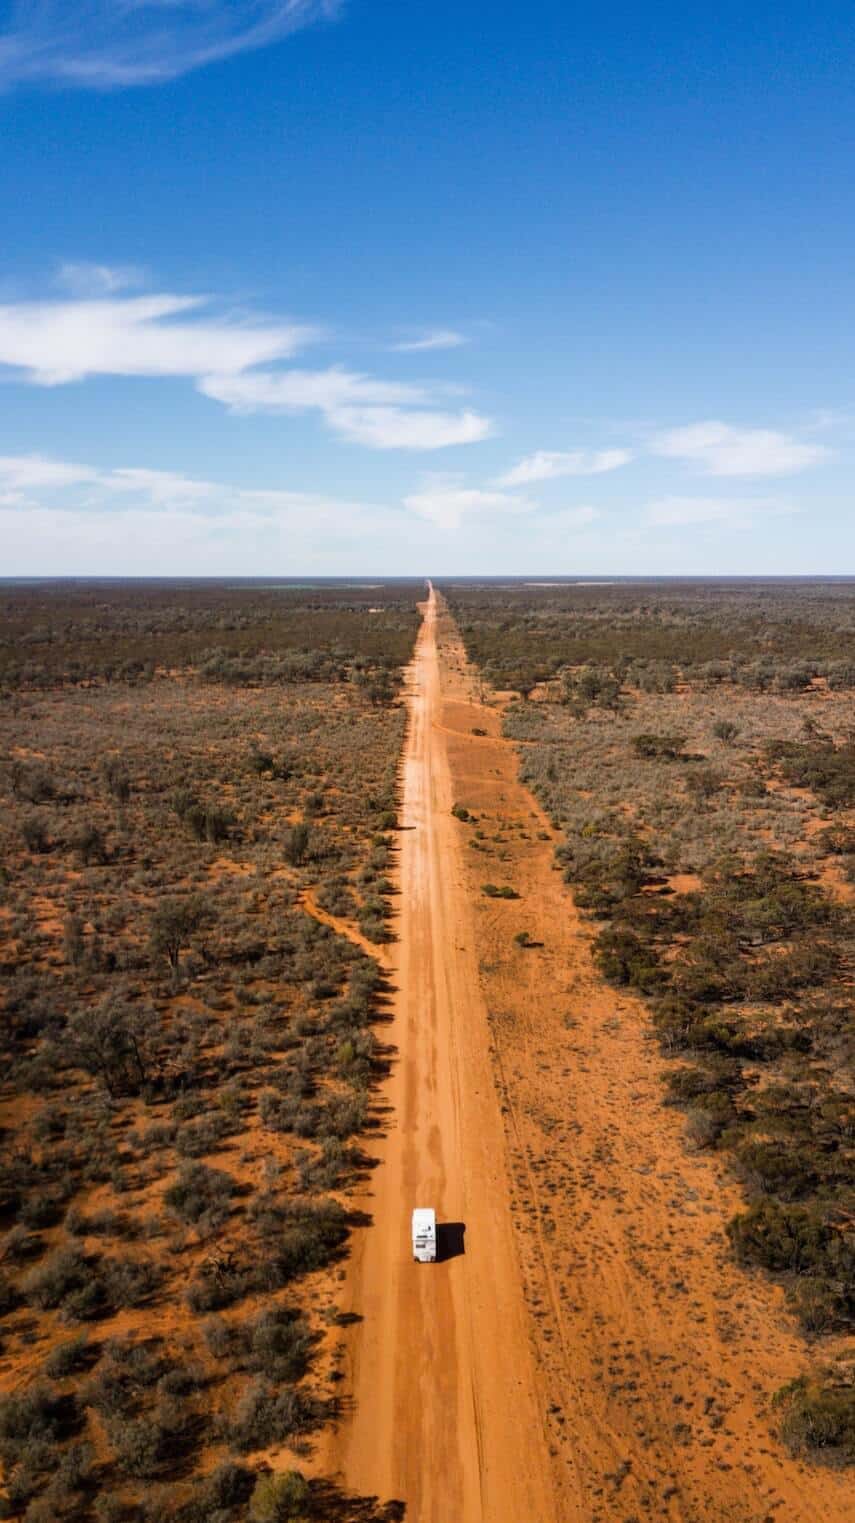 Red Dirt road with outback shrub-land either side